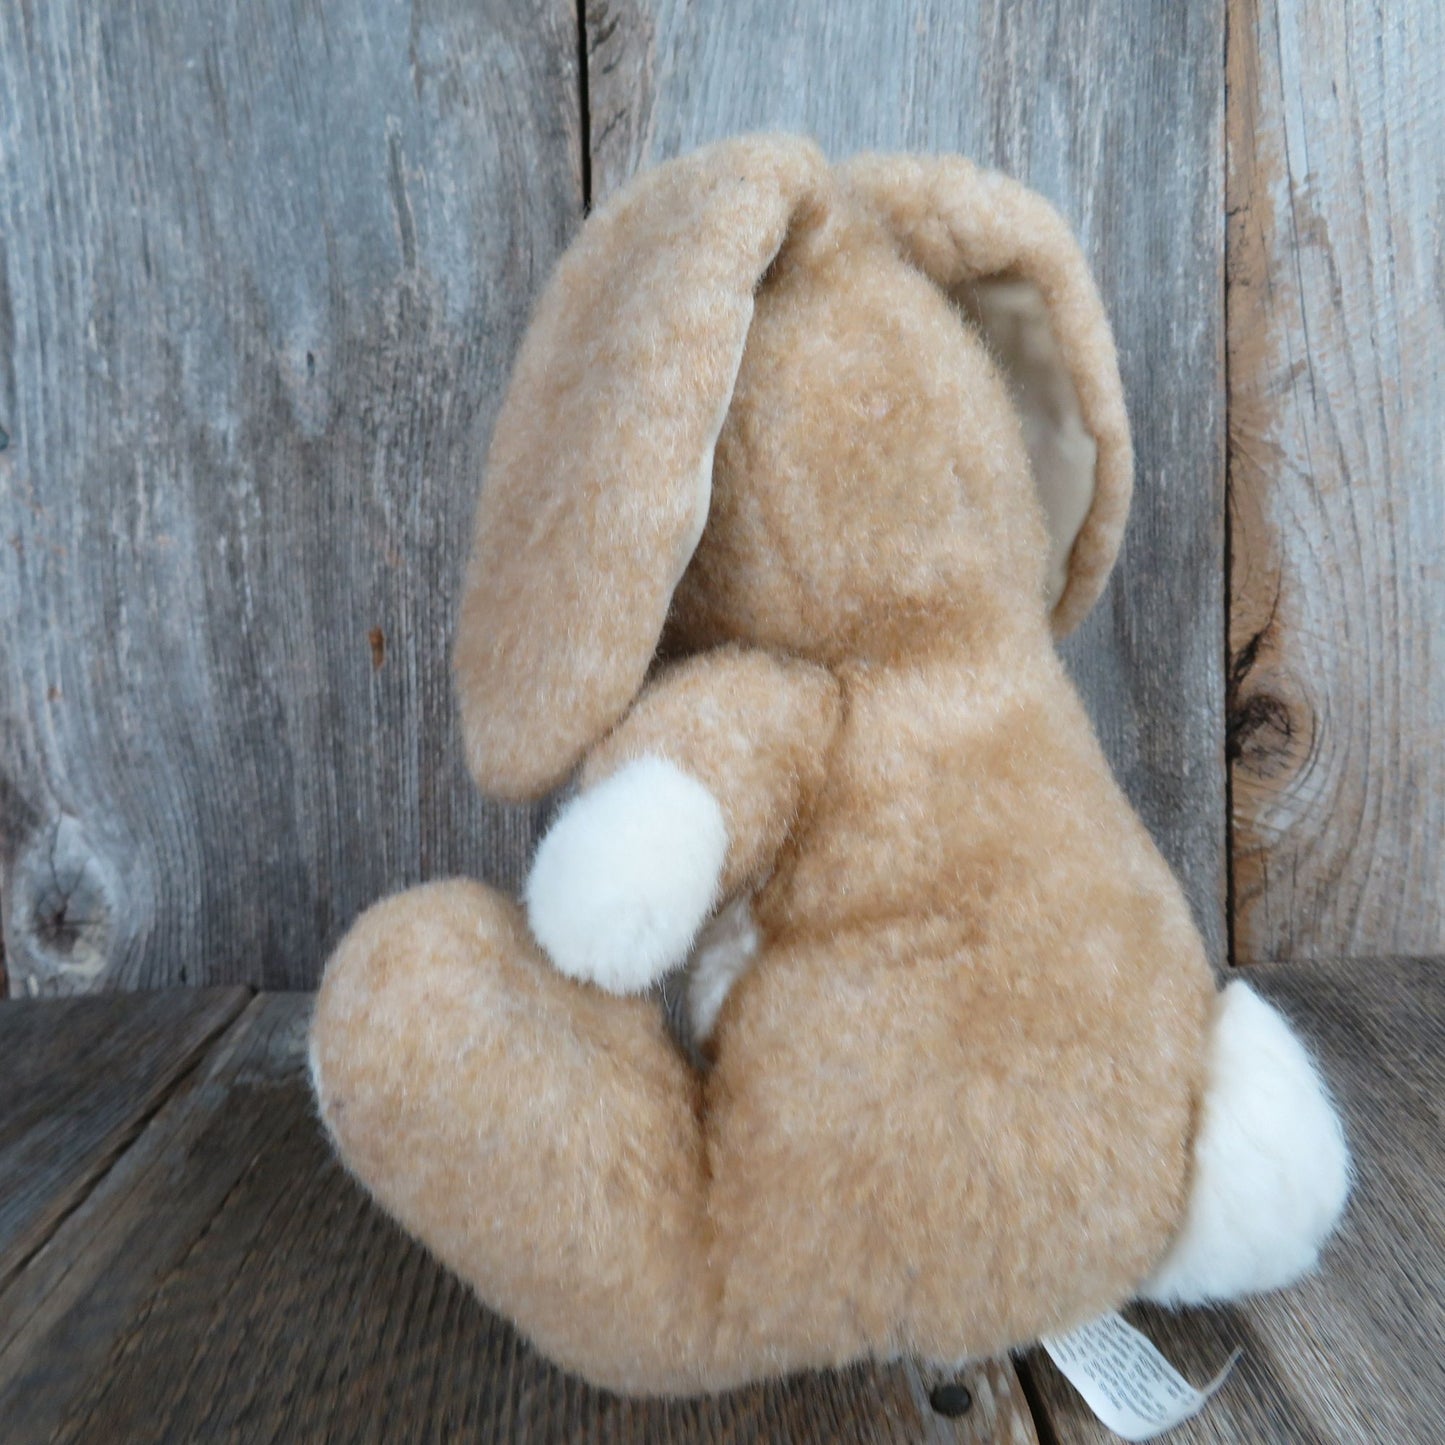 Vintage Bunny Rabbit Plush Beige Brown with Blue Bow Hard Stuffed Animal Plastic Eyes and Flocked Nose Easter